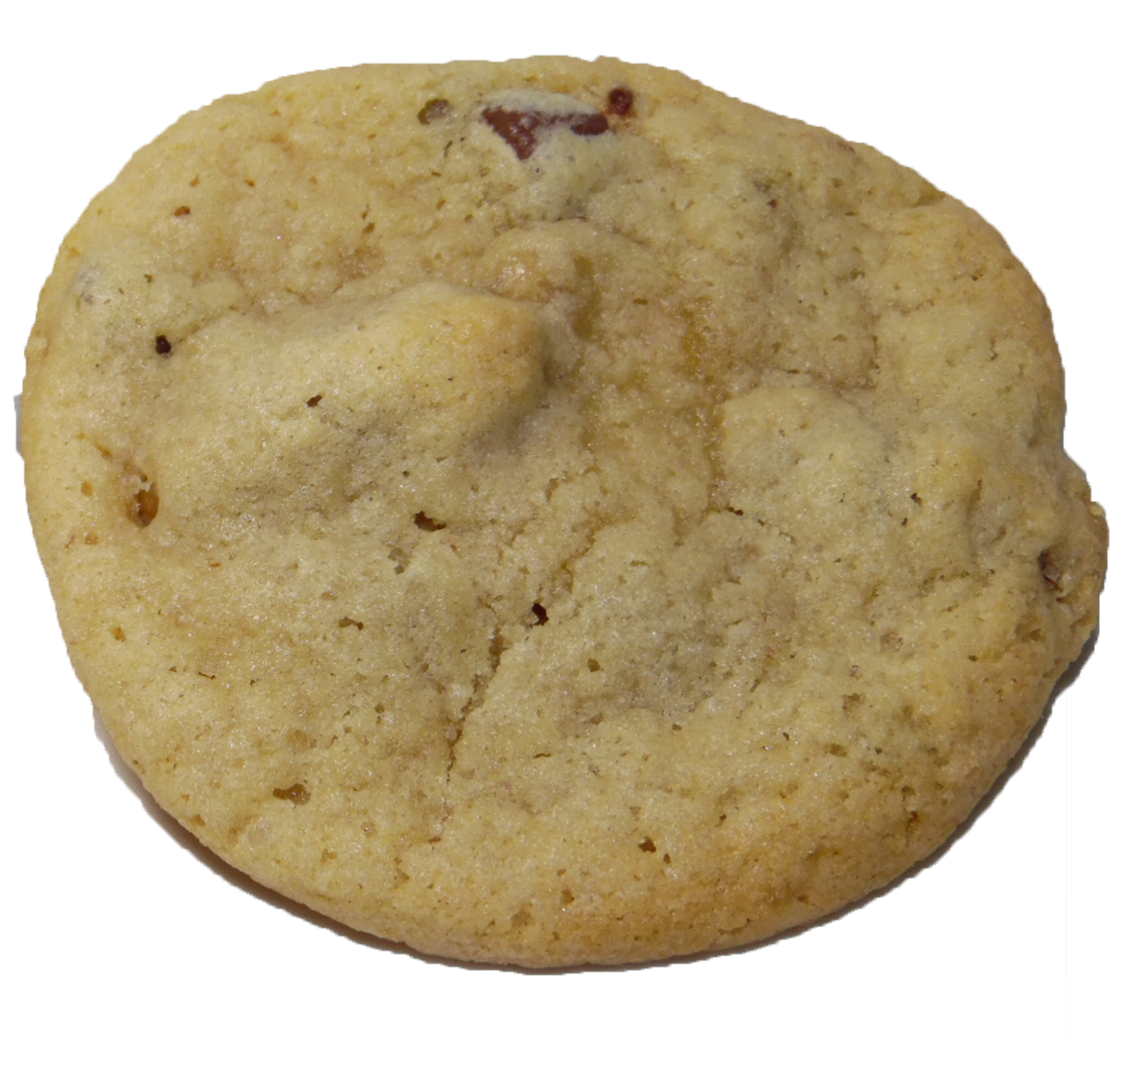 Buttery, Soft and Chewy Chocolate Chip Cookie with Pecans. The flavors are more than explosive.